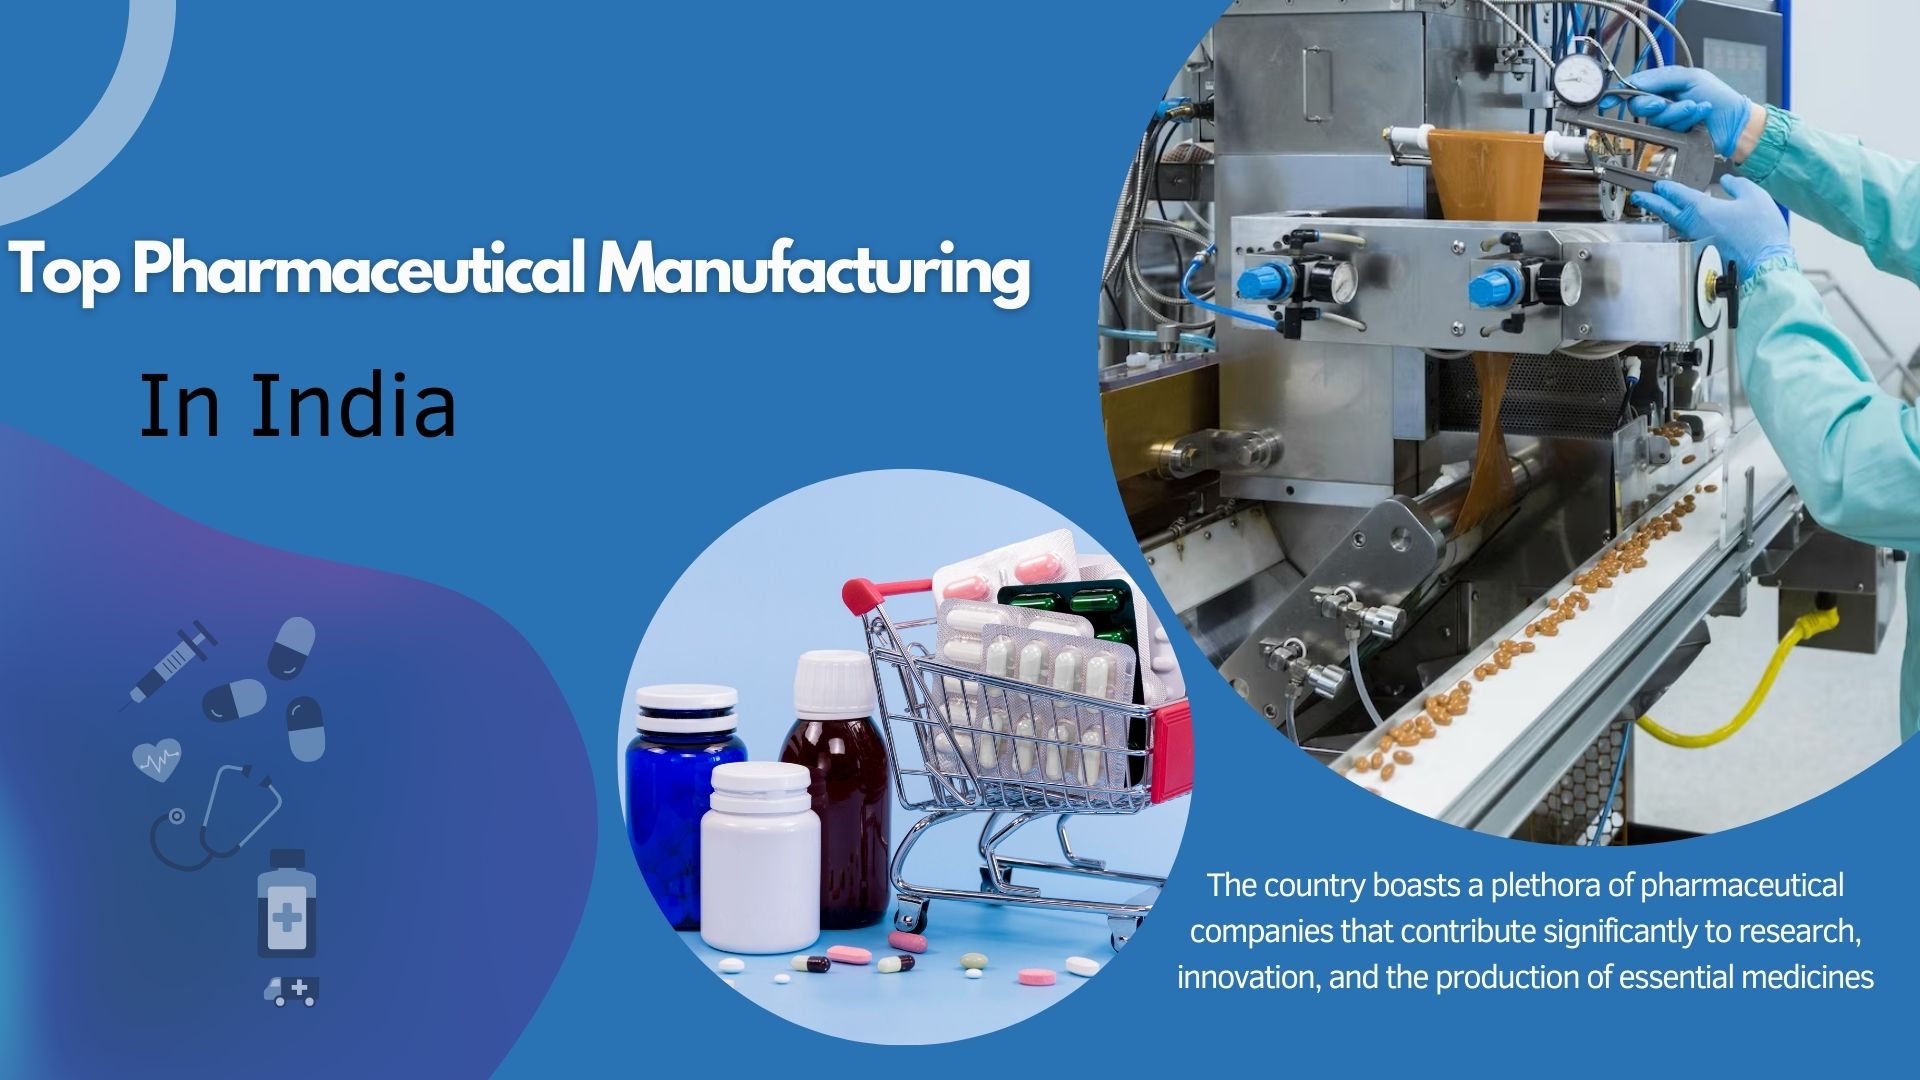 Top Pharmaceutical Manufacturing Company in India